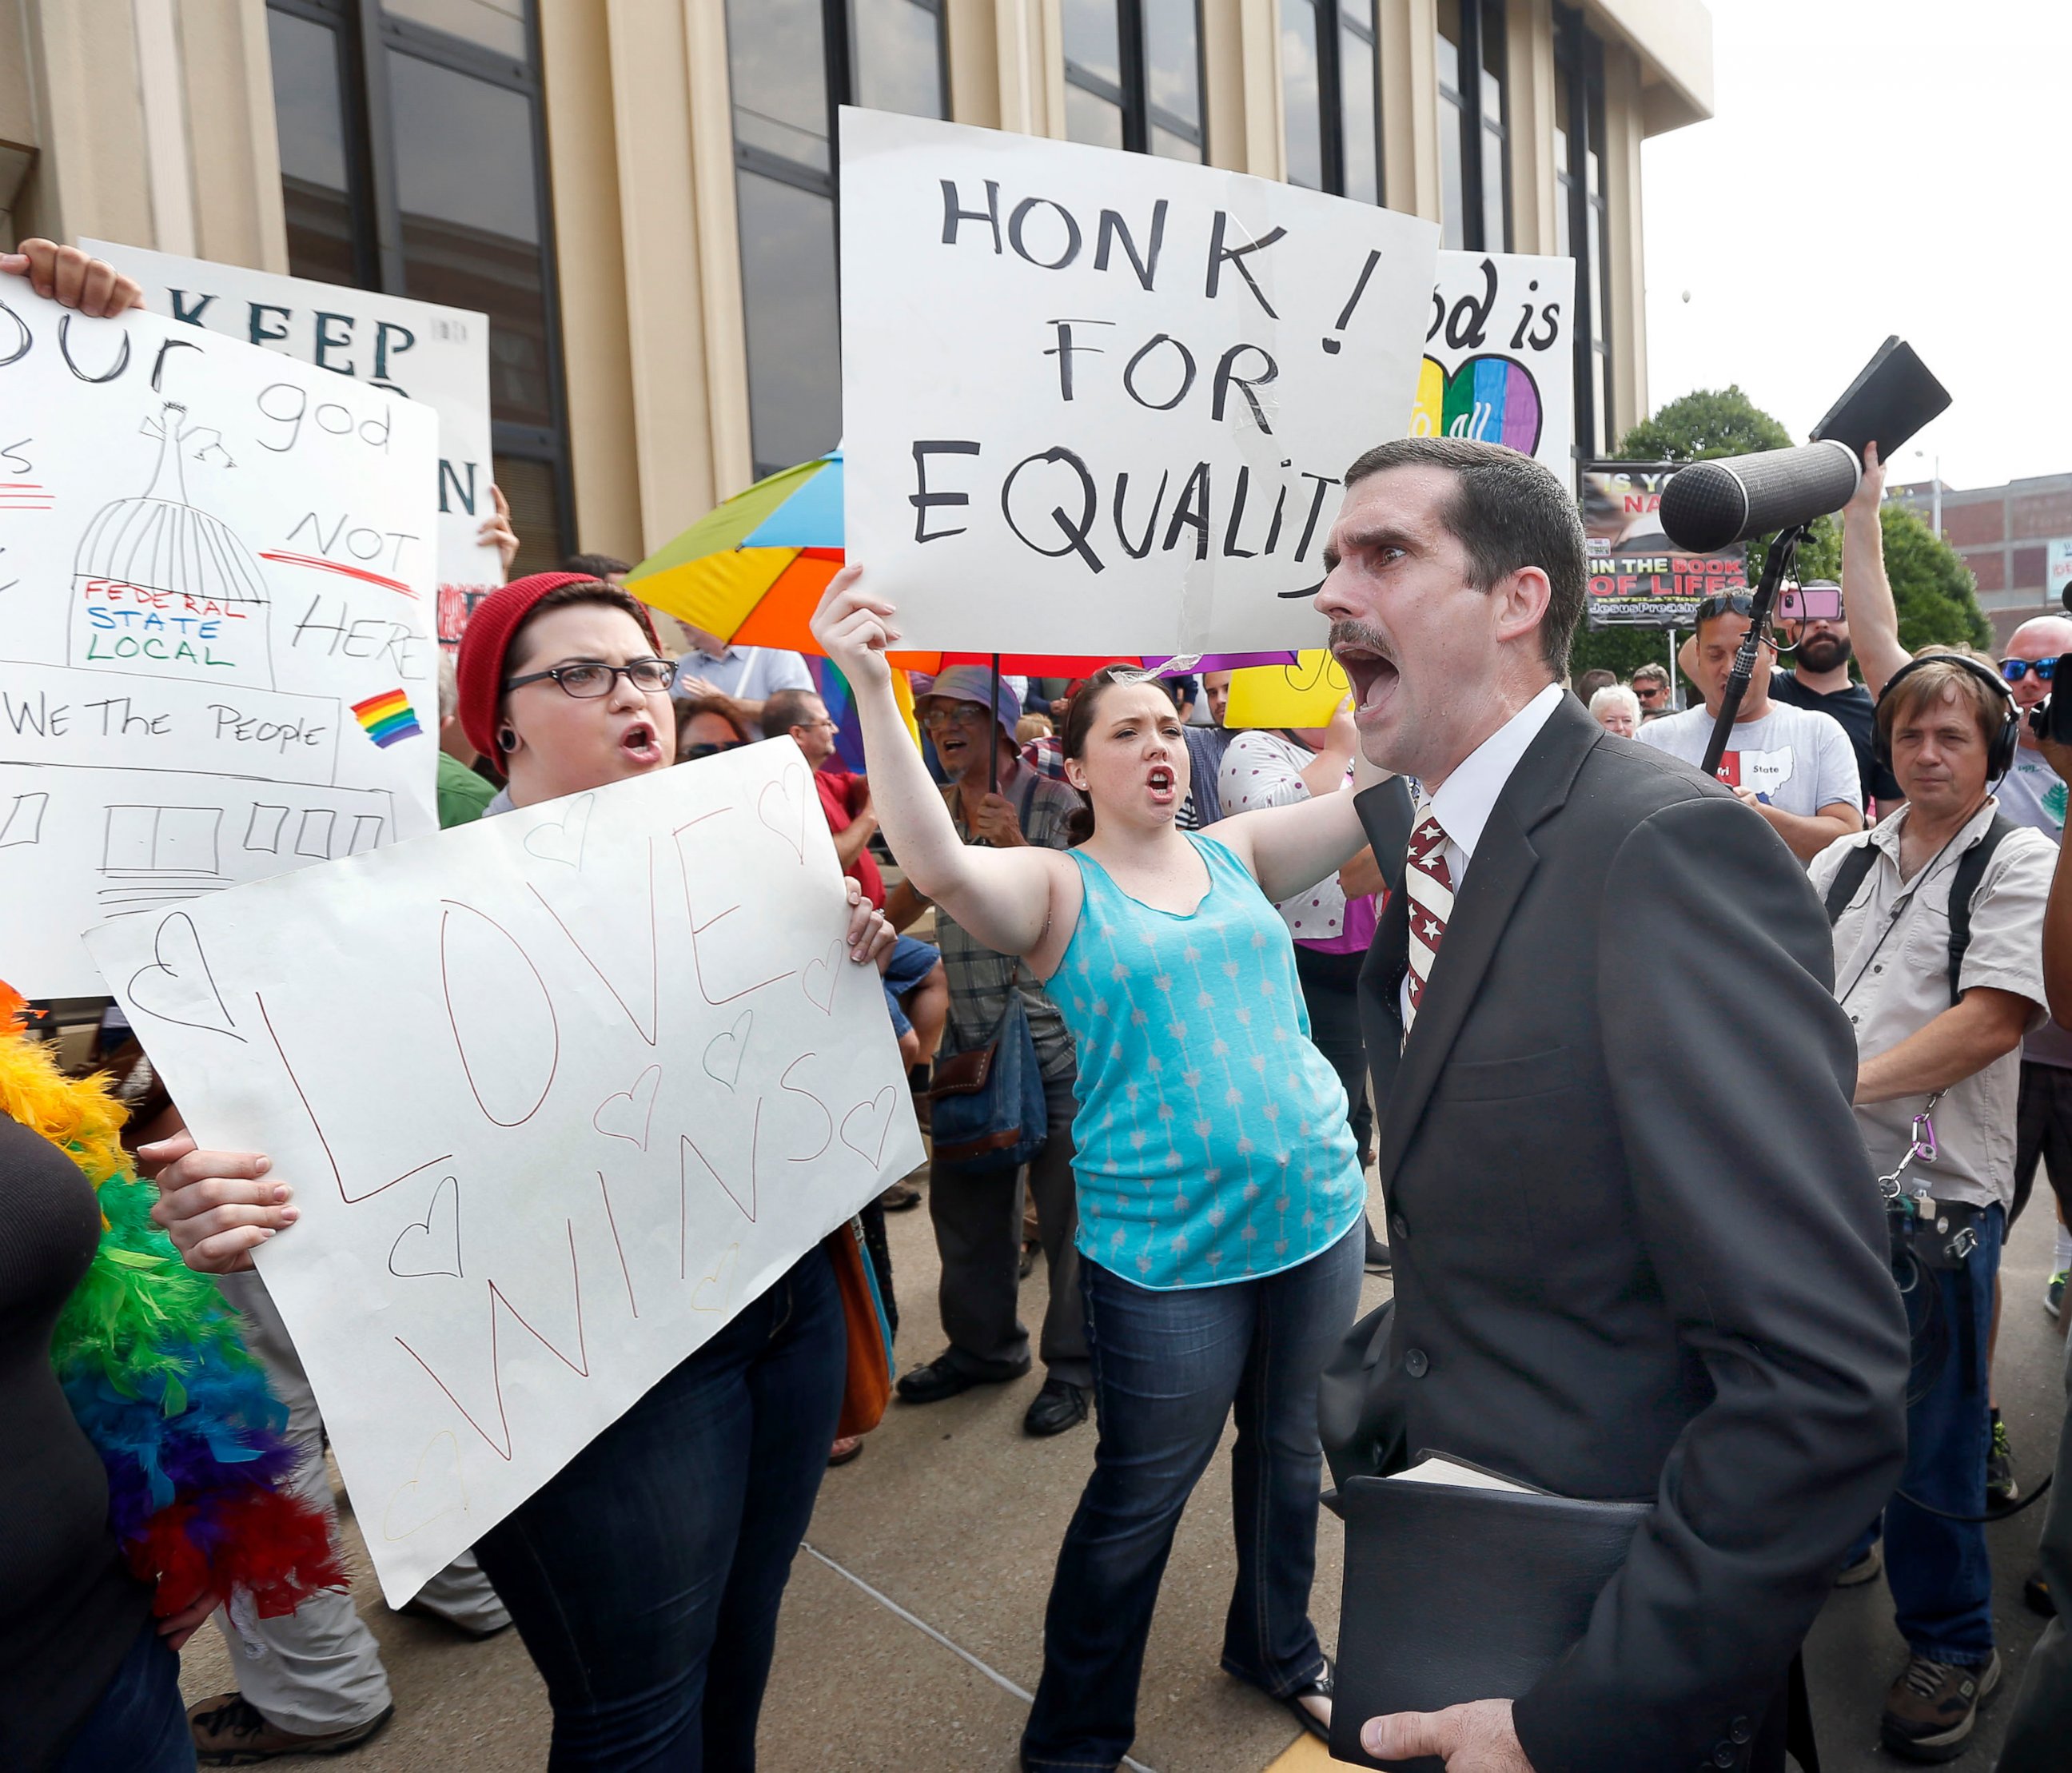 PHOTO: Street preacher Jeffrey Shook preaches to gay marriage supporters in front of the Carl D. Perkins Federal Building in Ashland, Ky., Sept. 3, 2015.